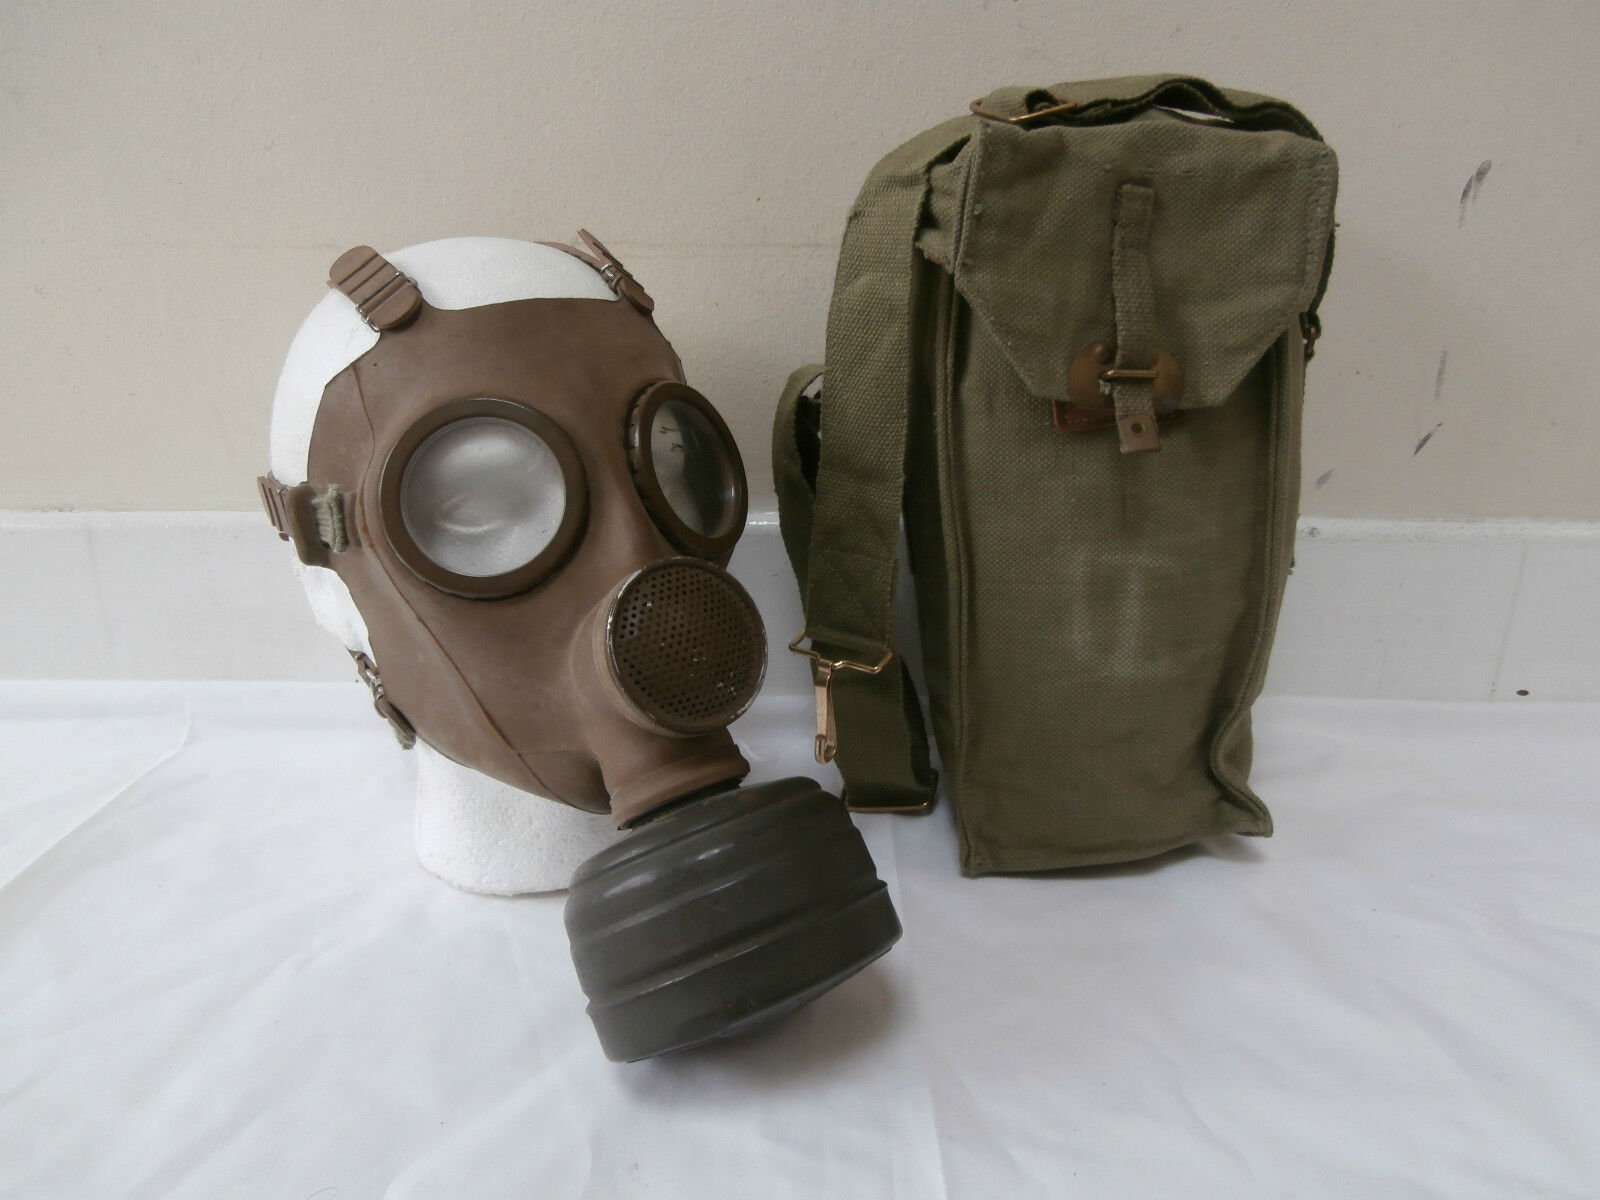 Belgian M51 Army Gas Mask With Filter & Bag Original Military Issue Equipment 